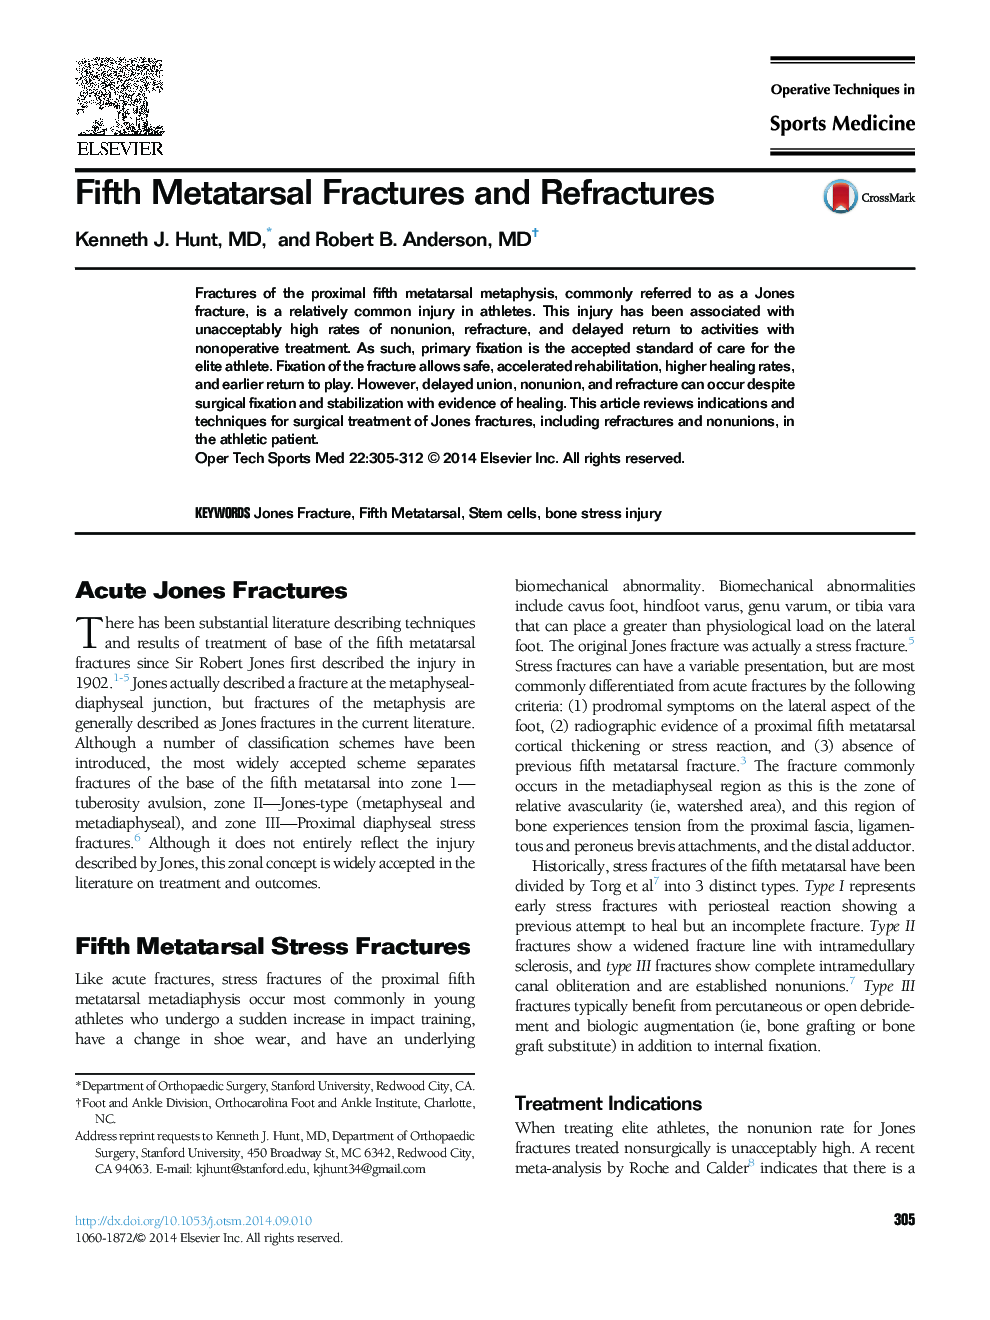 Fifth Metatarsal Fractures and Refractures